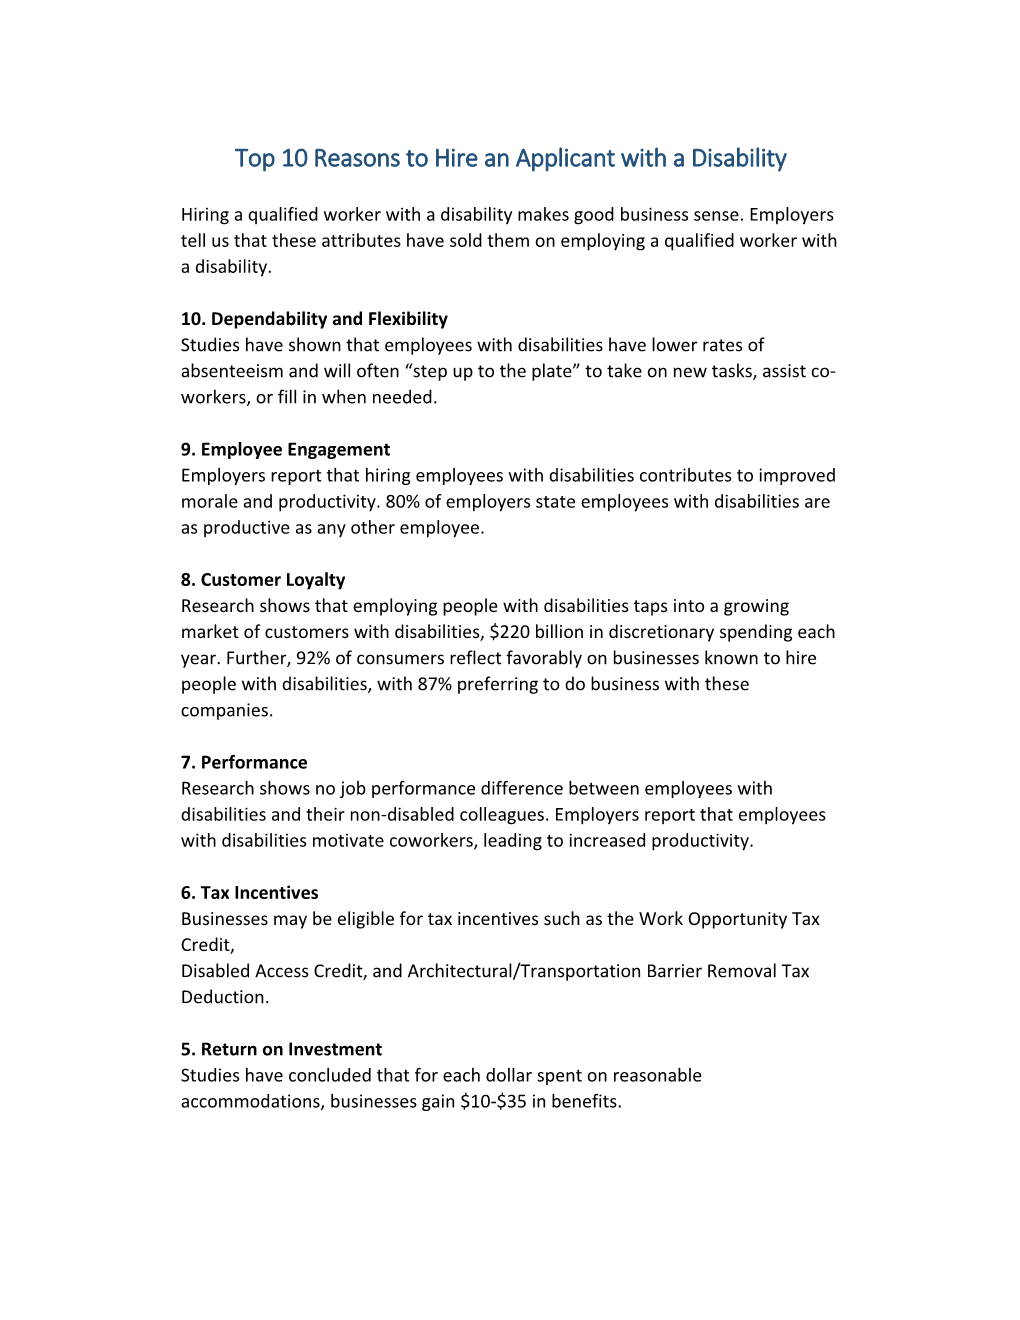 Top 10 Reasons to Hire an Applicant with a Disability